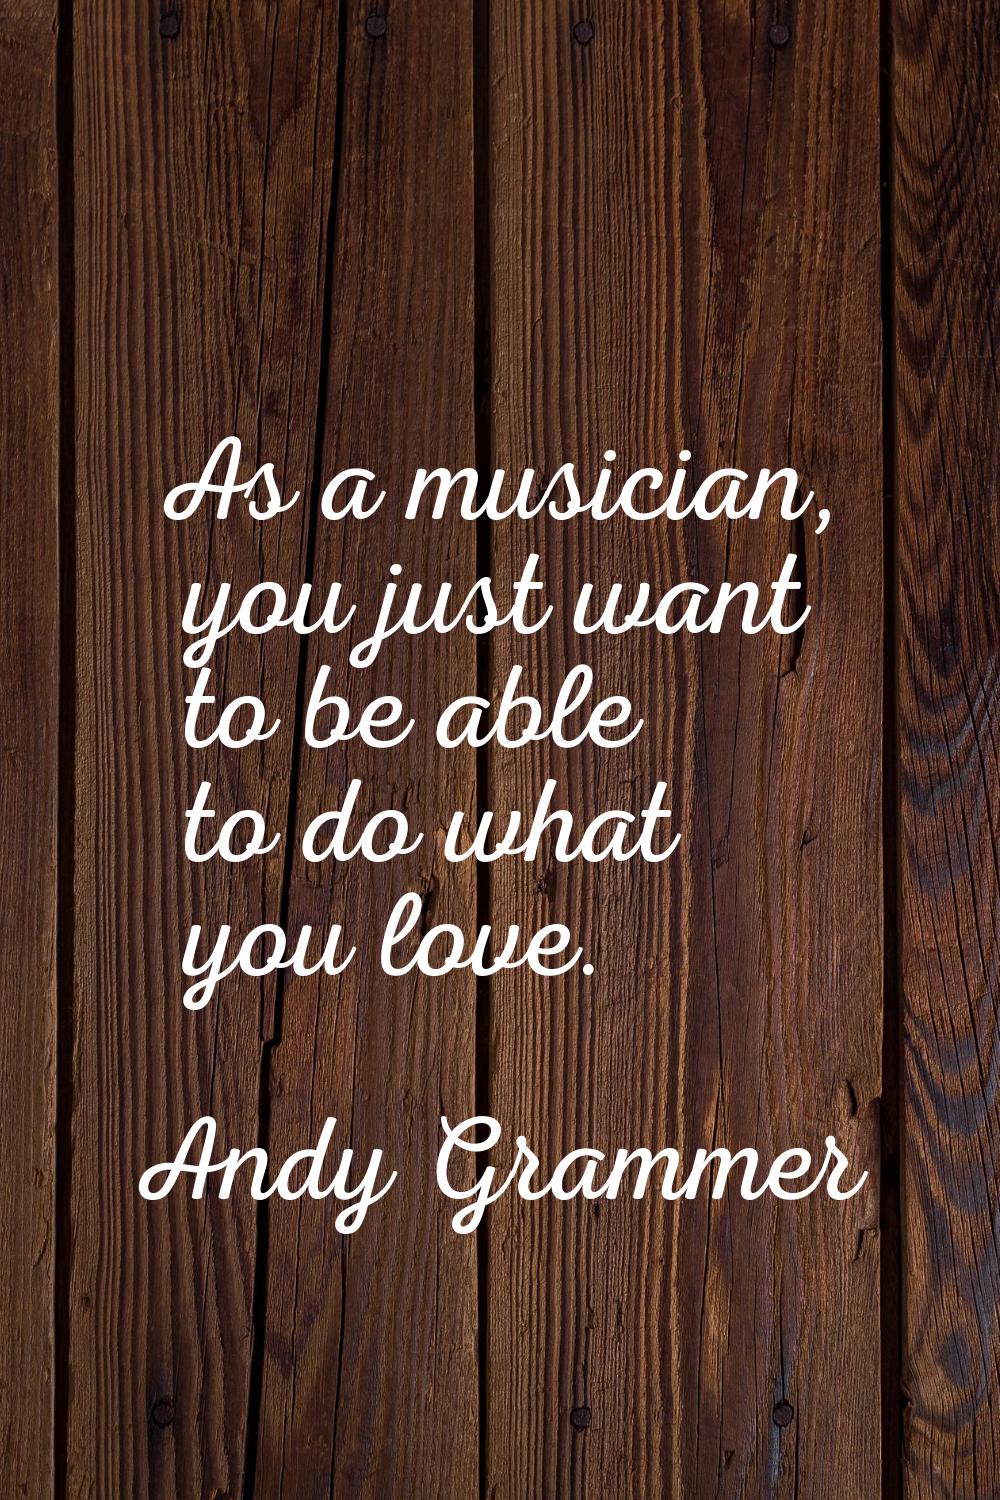 As a musician, you just want to be able to do what you love.